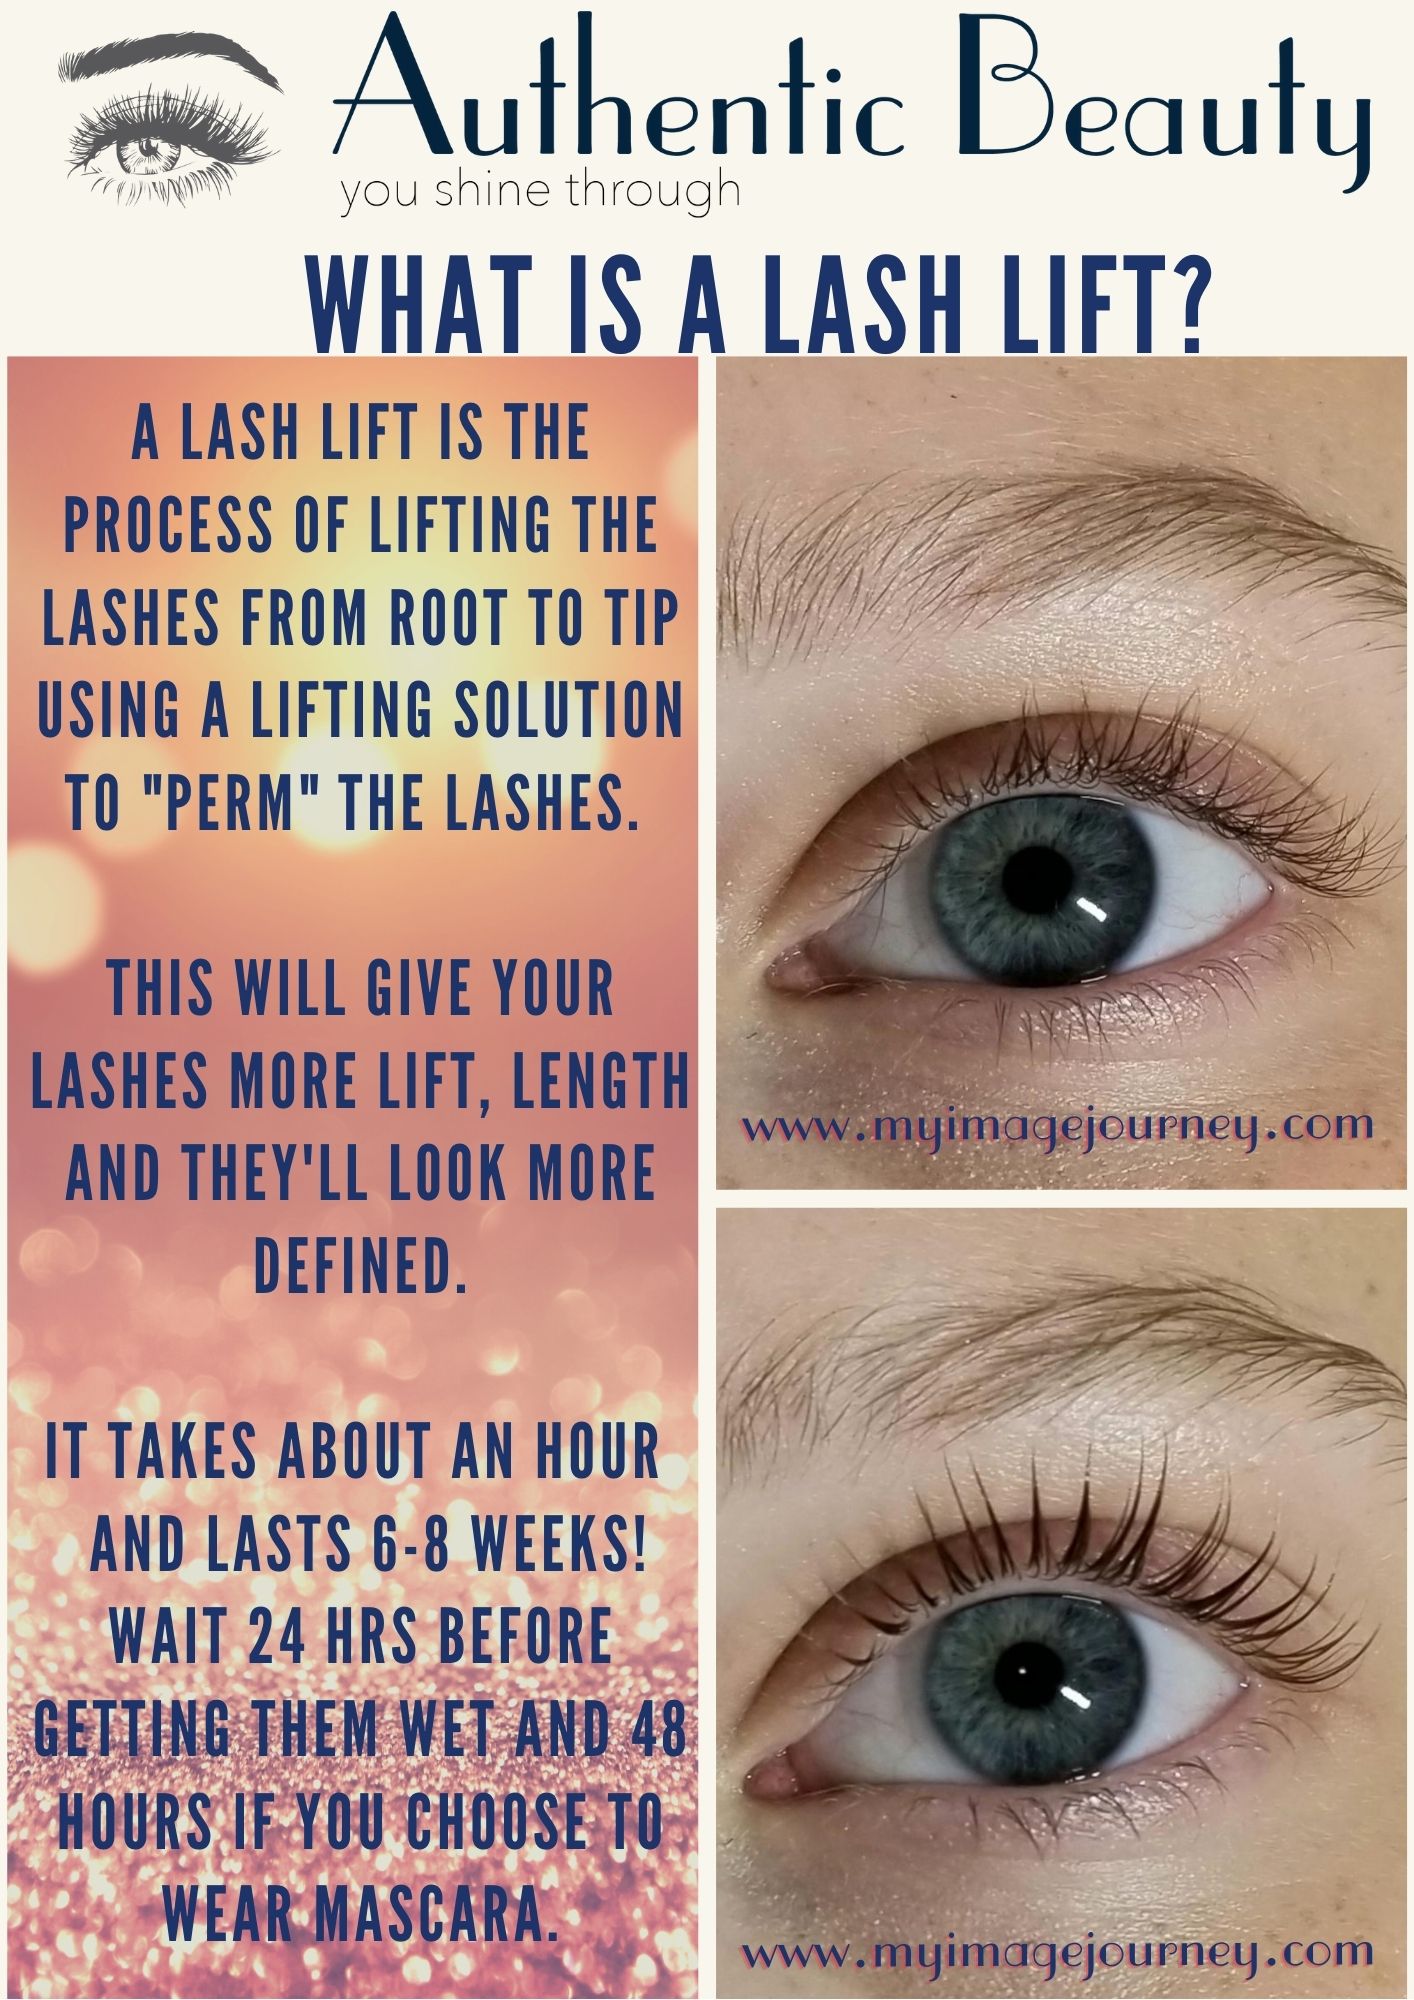 A Lash Lift and lash tint from Authentic Beauty Makeup Salon & Brow Studio in Atlanta will gorgeously define your eyes while wearing a mask. 